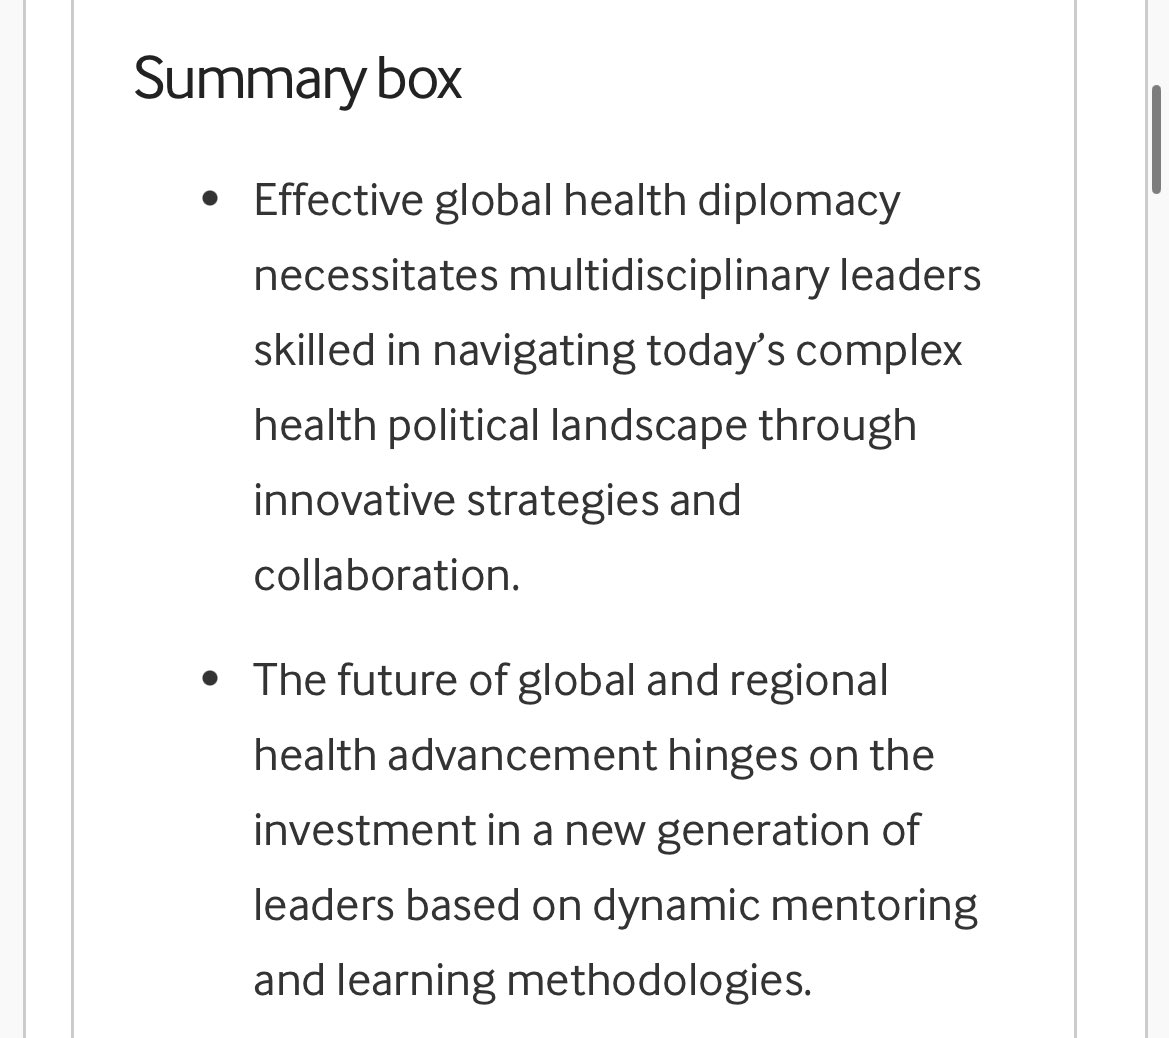 Powerful lessons by @brianwong_ et al. for renewing political leadership via global health diplomacy: ▫️Articulate health as a political choice ▫️Move beyond traditional public health models ▫️Leverage emerging global dynamics ▫️Cultivate new generation of public health leaders